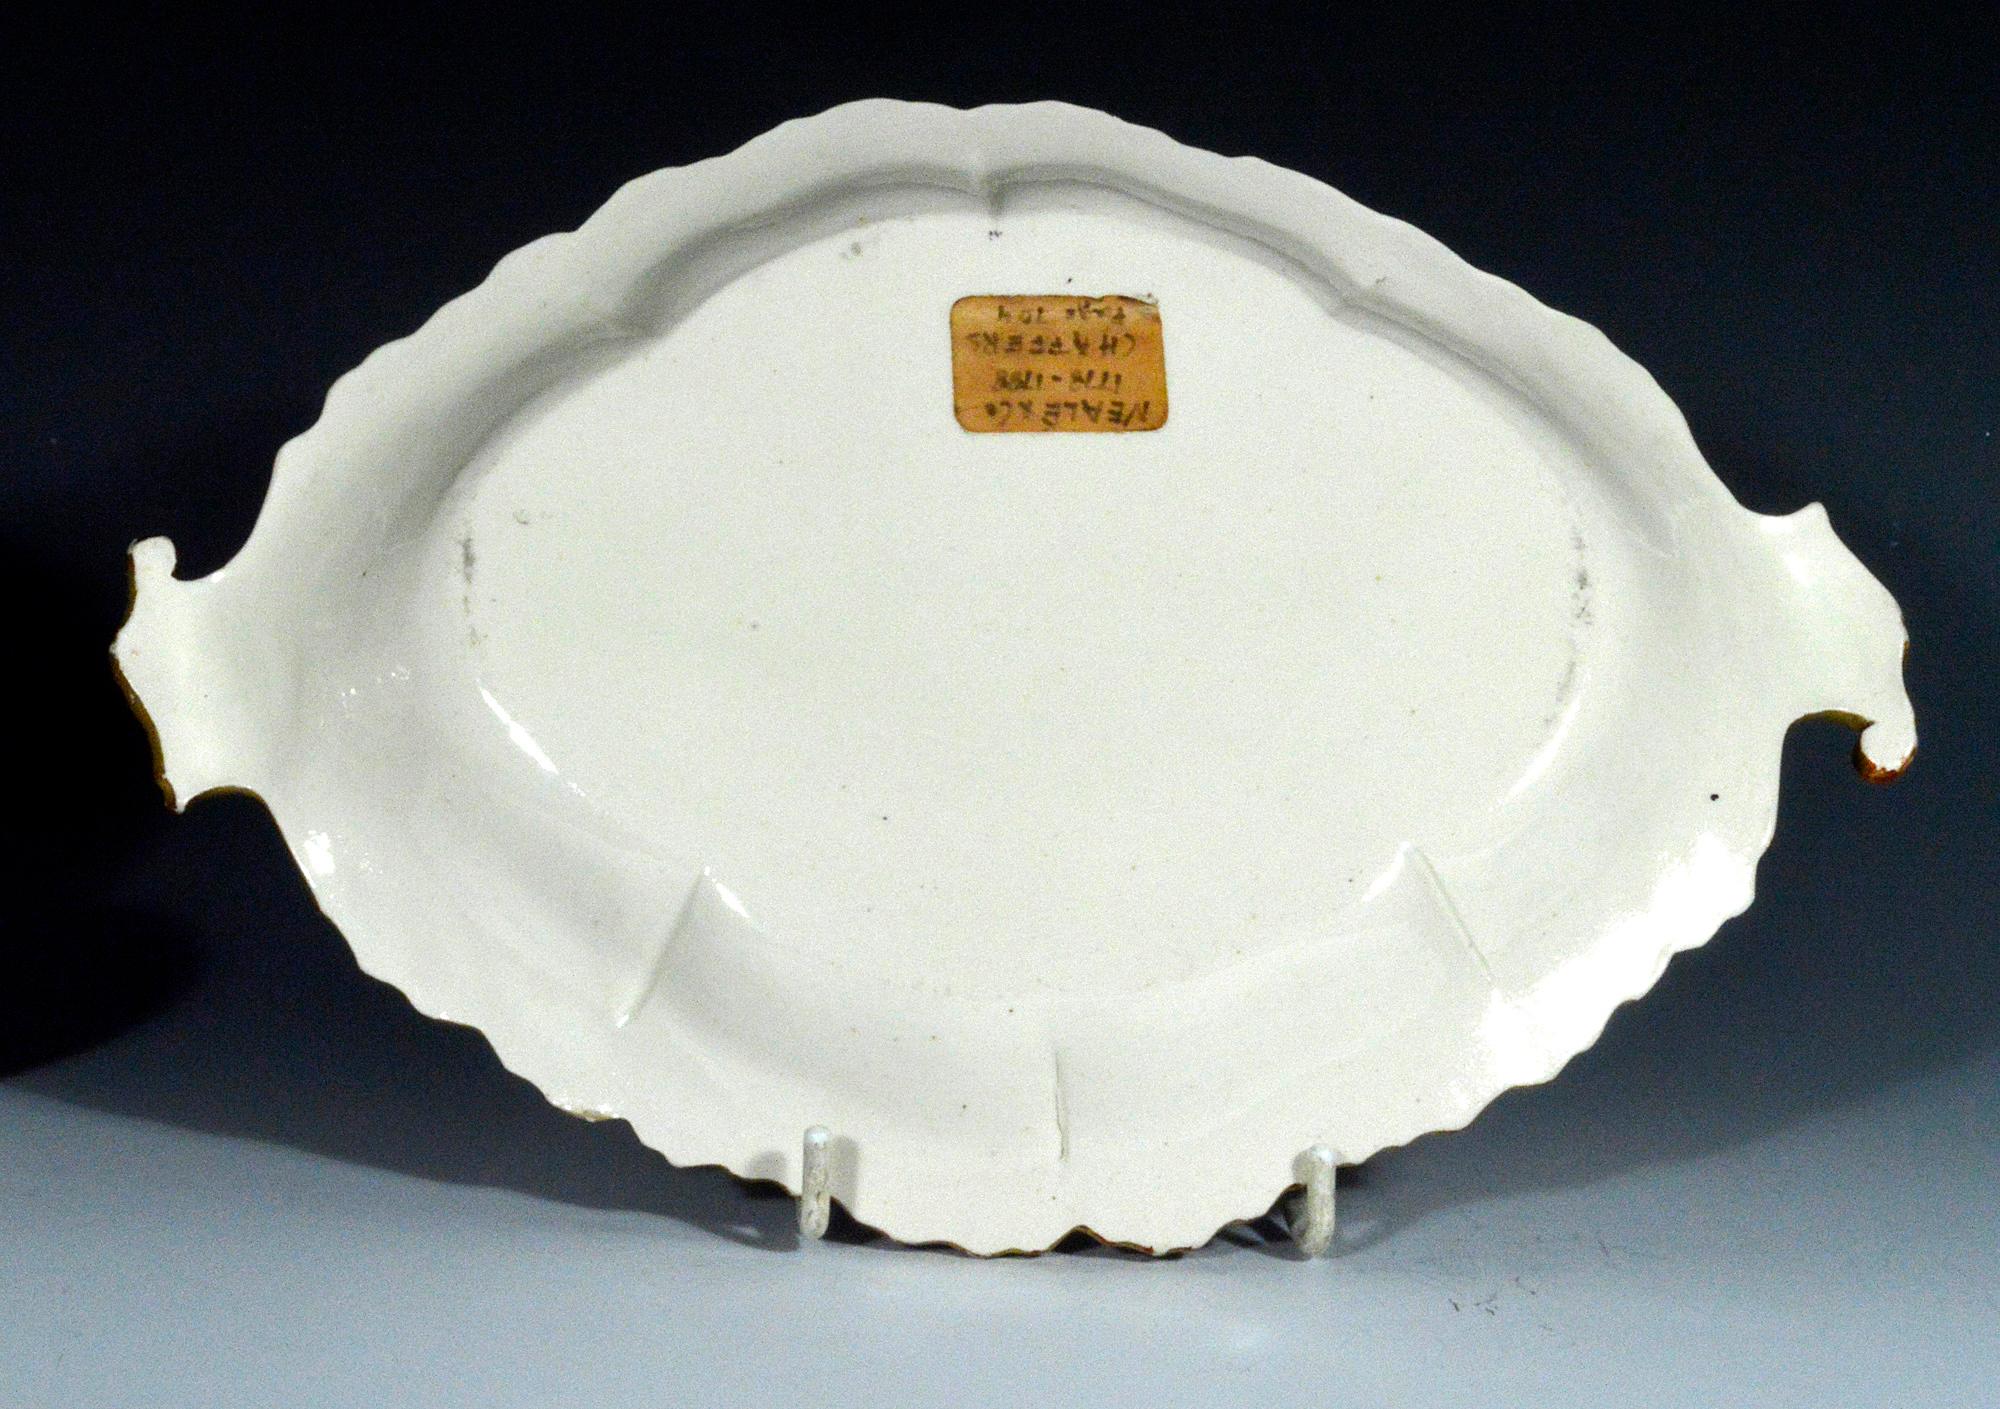 Pottery 18th Century Shell-Edge Creamware Sauce Tureen Puce-Decorated by Neale & Co. For Sale